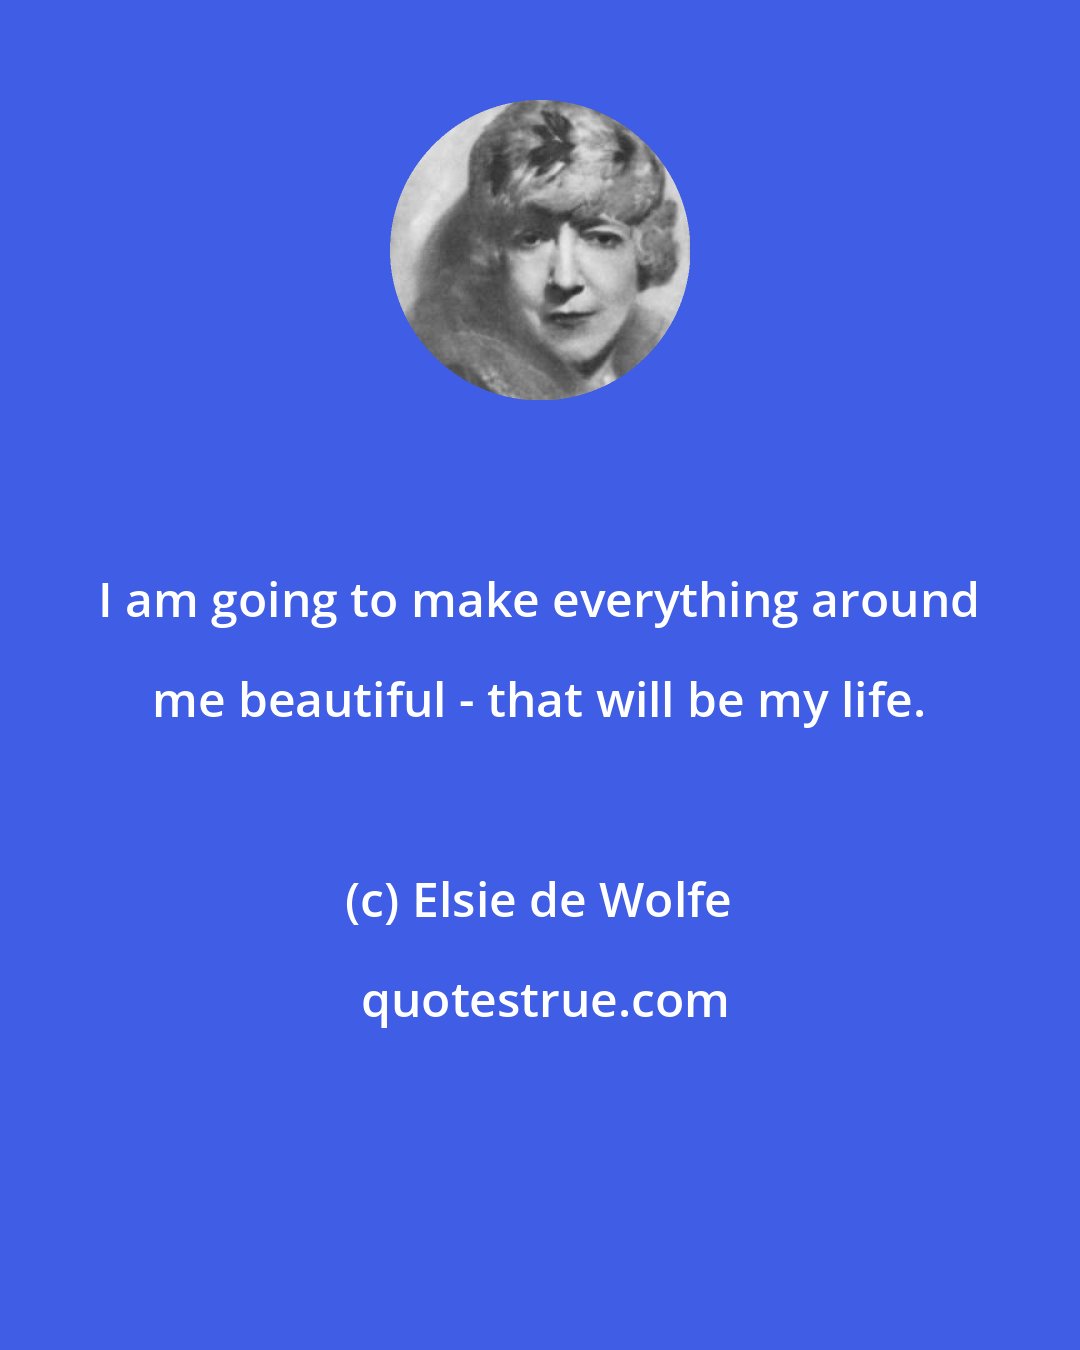 Elsie de Wolfe: I am going to make everything around me beautiful - that will be my life.